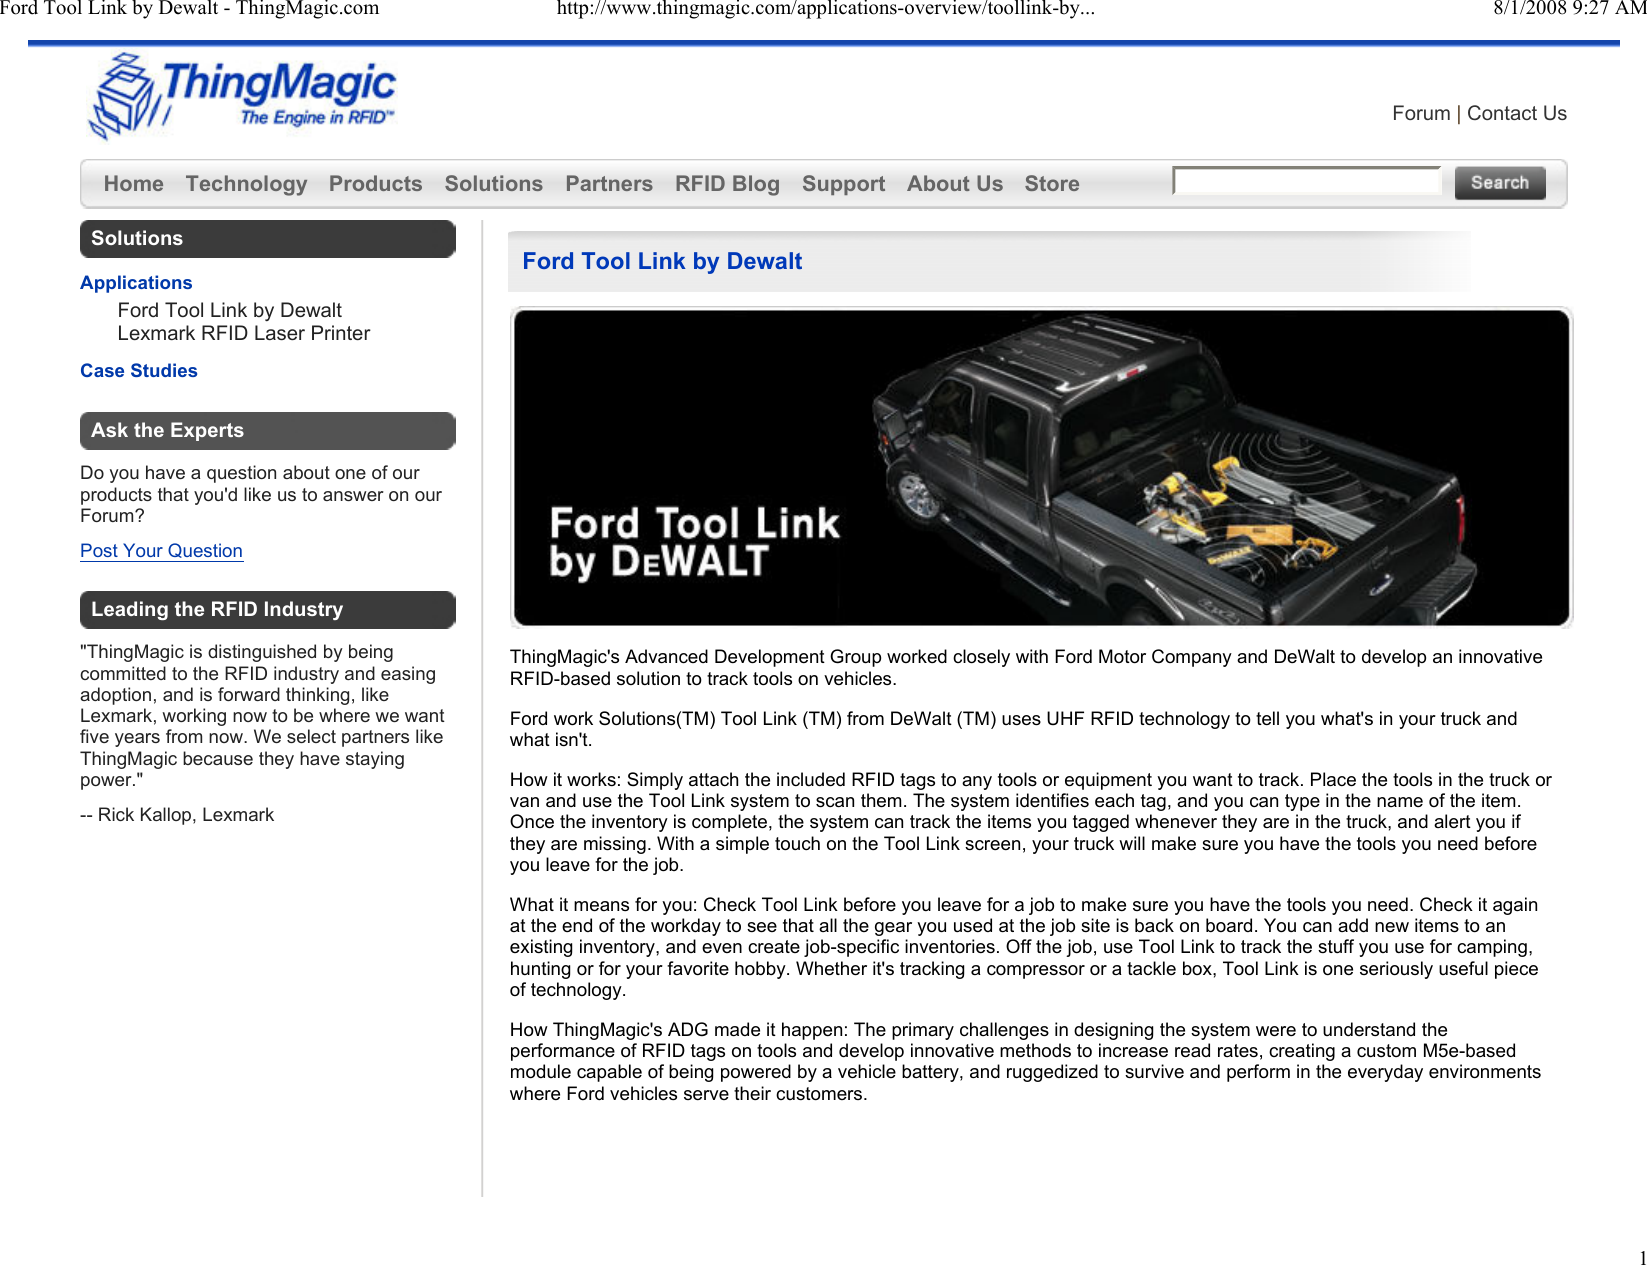 Ford Tool Link by Dewalt - ThingMagic.com http://www.thingmagic.com/applications-overview/toollink-by... 8/1/2008 9:27 AM1Forum | Contact UsHome Technology Products Solutions Partners RFID Blog Support About Us Store  Ford Tool Link by DewaltThingMagic&apos;s Advanced Development Group worked closely with Ford Motor Company and DeWalt to develop an innovative RFID-based solution to track tools on vehicles. Ford work Solutions(TM) Tool Link (TM) from DeWalt (TM) uses UHF RFID technology to tell you what&apos;s in your truck and what isn&apos;t. How it works: Simply attach the included RFID tags to any tools or equipment you want to track. Place the tools in the truck or van and use the Tool Link system to scan them. The system identifies each tag, and you can type in the name of the item. Once the inventory is complete, the system can track the items you tagged whenever they are in the truck, and alert you if they are missing. With a simple touch on the Tool Link screen, your truck will make sure you have the tools you need before you leave for the job. What it means for you: Check Tool Link before you leave for a job to make sure you have the tools you need. Check it again at the end of the workday to see that all the gear you used at the job site is back on board. You can add new items to an existing inventory, and even create job-specific inventories. Off the job, use Tool Link to track the stuff you use for camping, hunting or for your favorite hobby. Whether it&apos;s tracking a compressor or a tackle box, Tool Link is one seriously useful piece of technology. How ThingMagic&apos;s ADG made it happen: The primary challenges in designing the system were to understand the performance of RFID tags on tools and develop innovative methods to increase read rates, creating a custom M5e-based module capable of being powered by a vehicle battery, and ruggedized to survive and perform in the everyday environments where Ford vehicles serve their customers. SolutionsApplicationsFord Tool Link by DewaltLexmark RFID Laser PrinterCase StudiesAsk the ExpertsDo you have a question about one of our products that you&apos;d like us to answer on our Forum?Post Your QuestionLeading the RFID Industry&quot;ThingMagic is distinguished by being committed to the RFID industry and easing adoption, and is forward thinking, like Lexmark, working now to be where we want five years from now. We select partners like ThingMagic because they have staying power.&quot;-- Rick Kallop, Lexmark